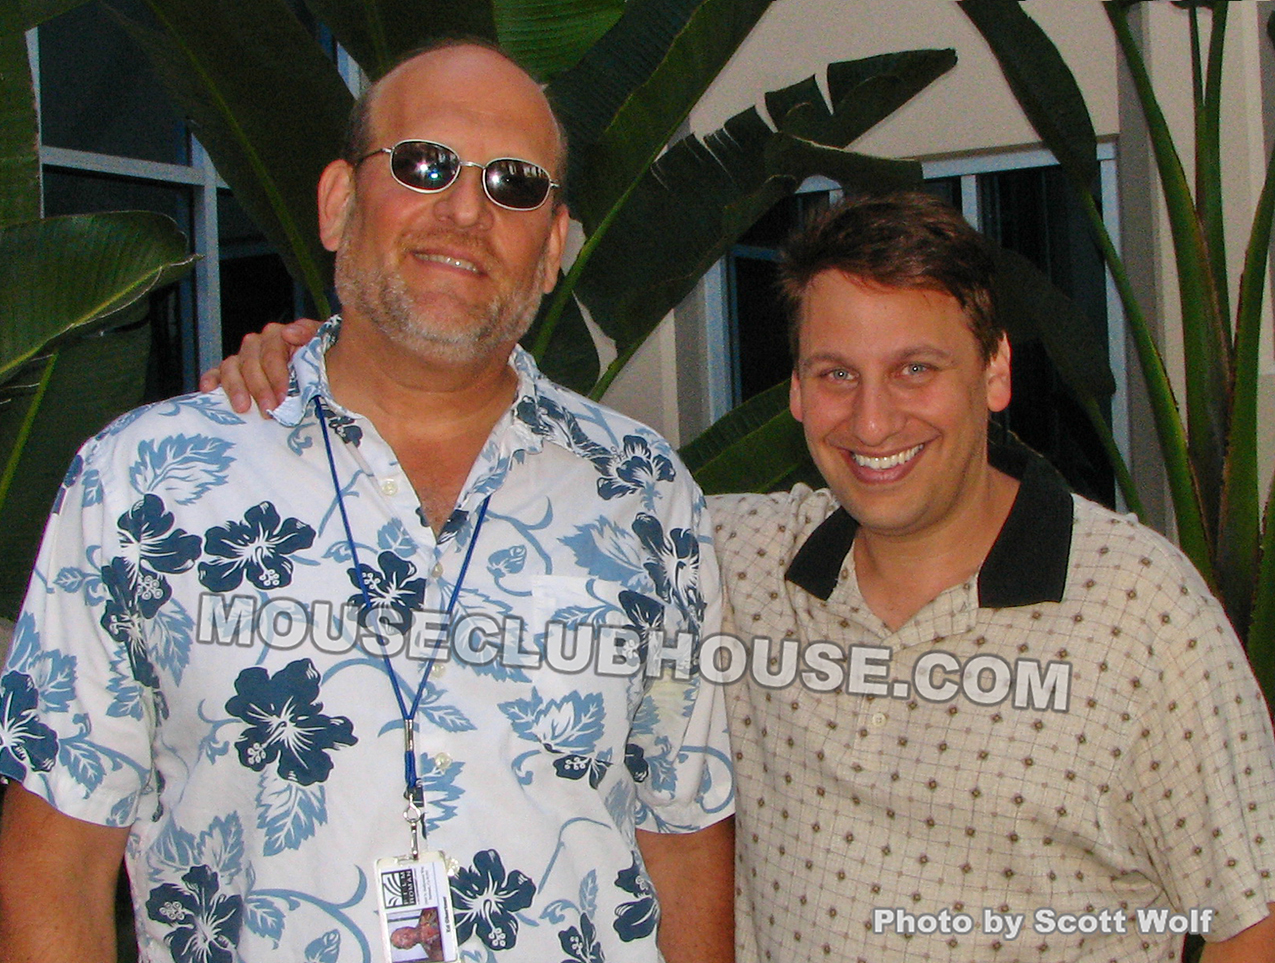 (left) Ed Ghertner, producer of TaleSpin and (right) Scott Wolf, assistant producer of TaleSpin